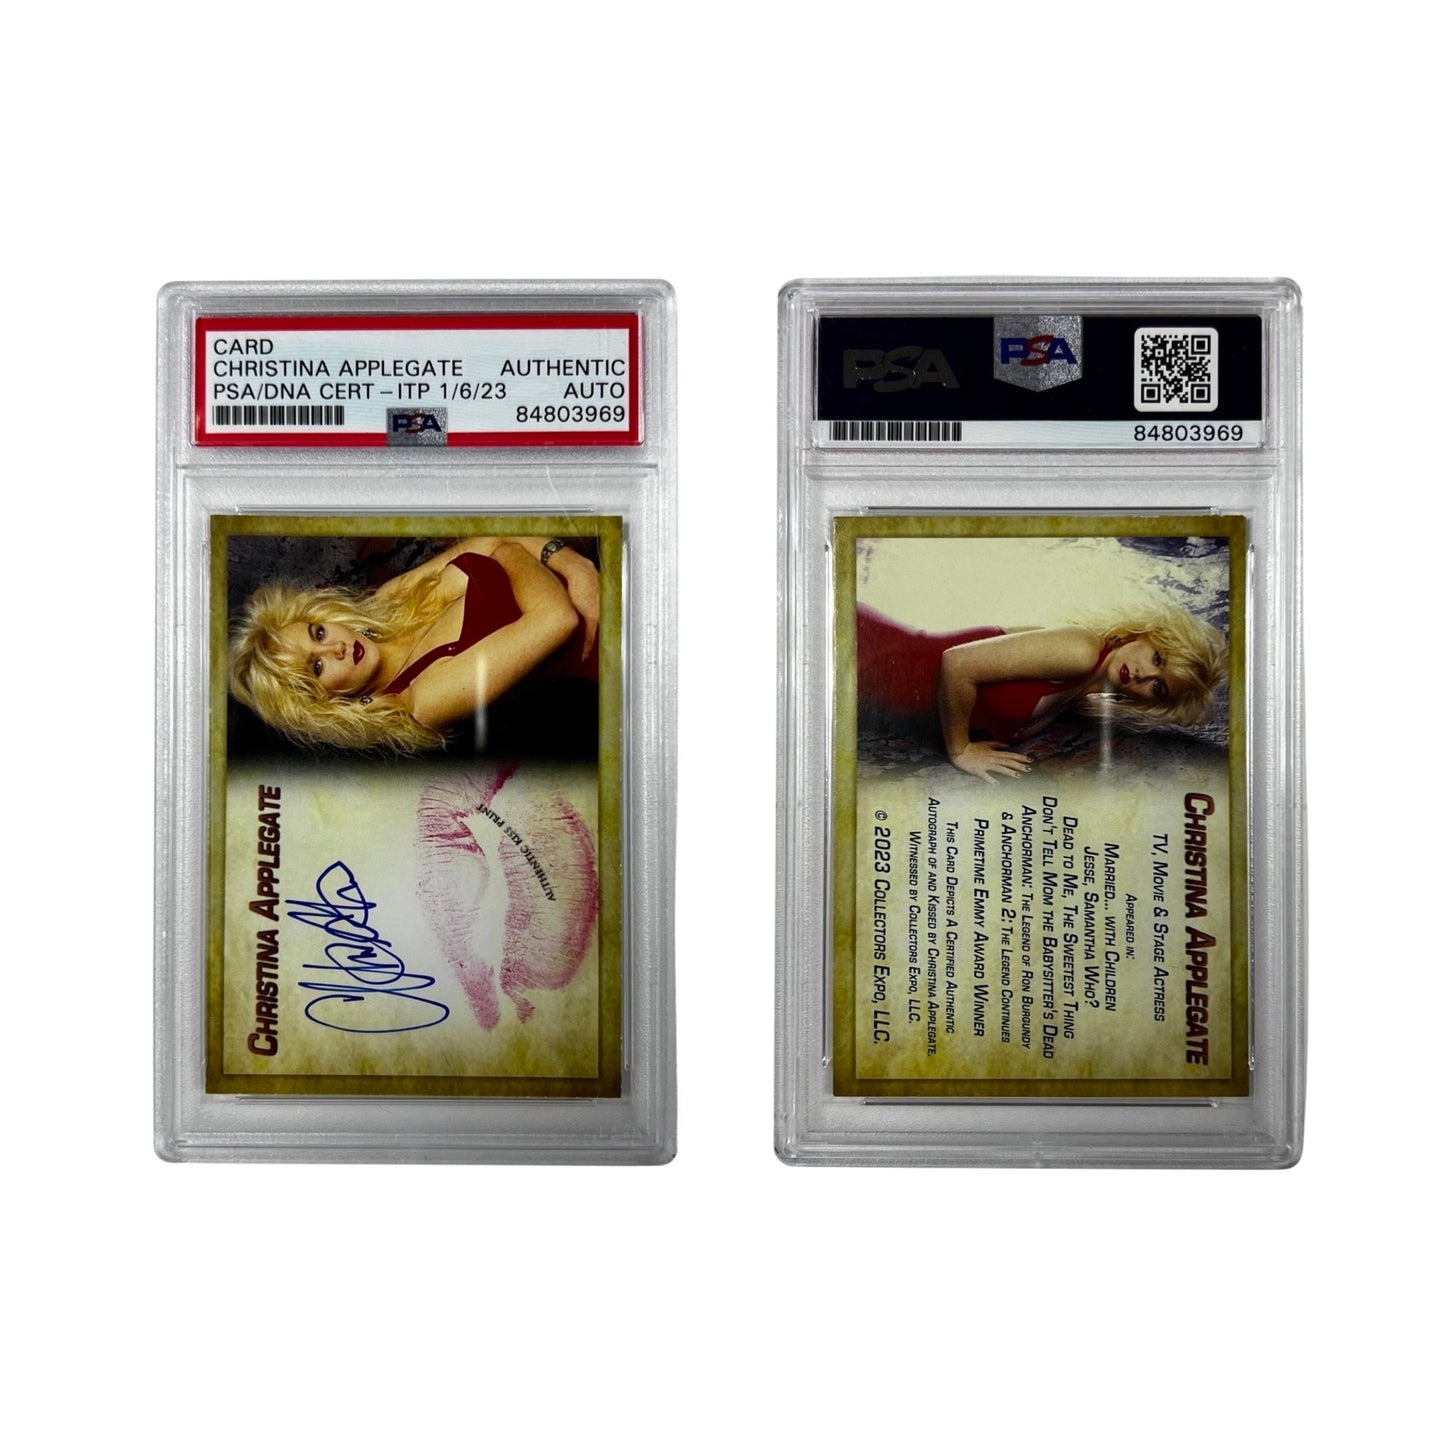 2023 Collector's Expo Kill Card Christina Applegate Red PSA Auto Authentic